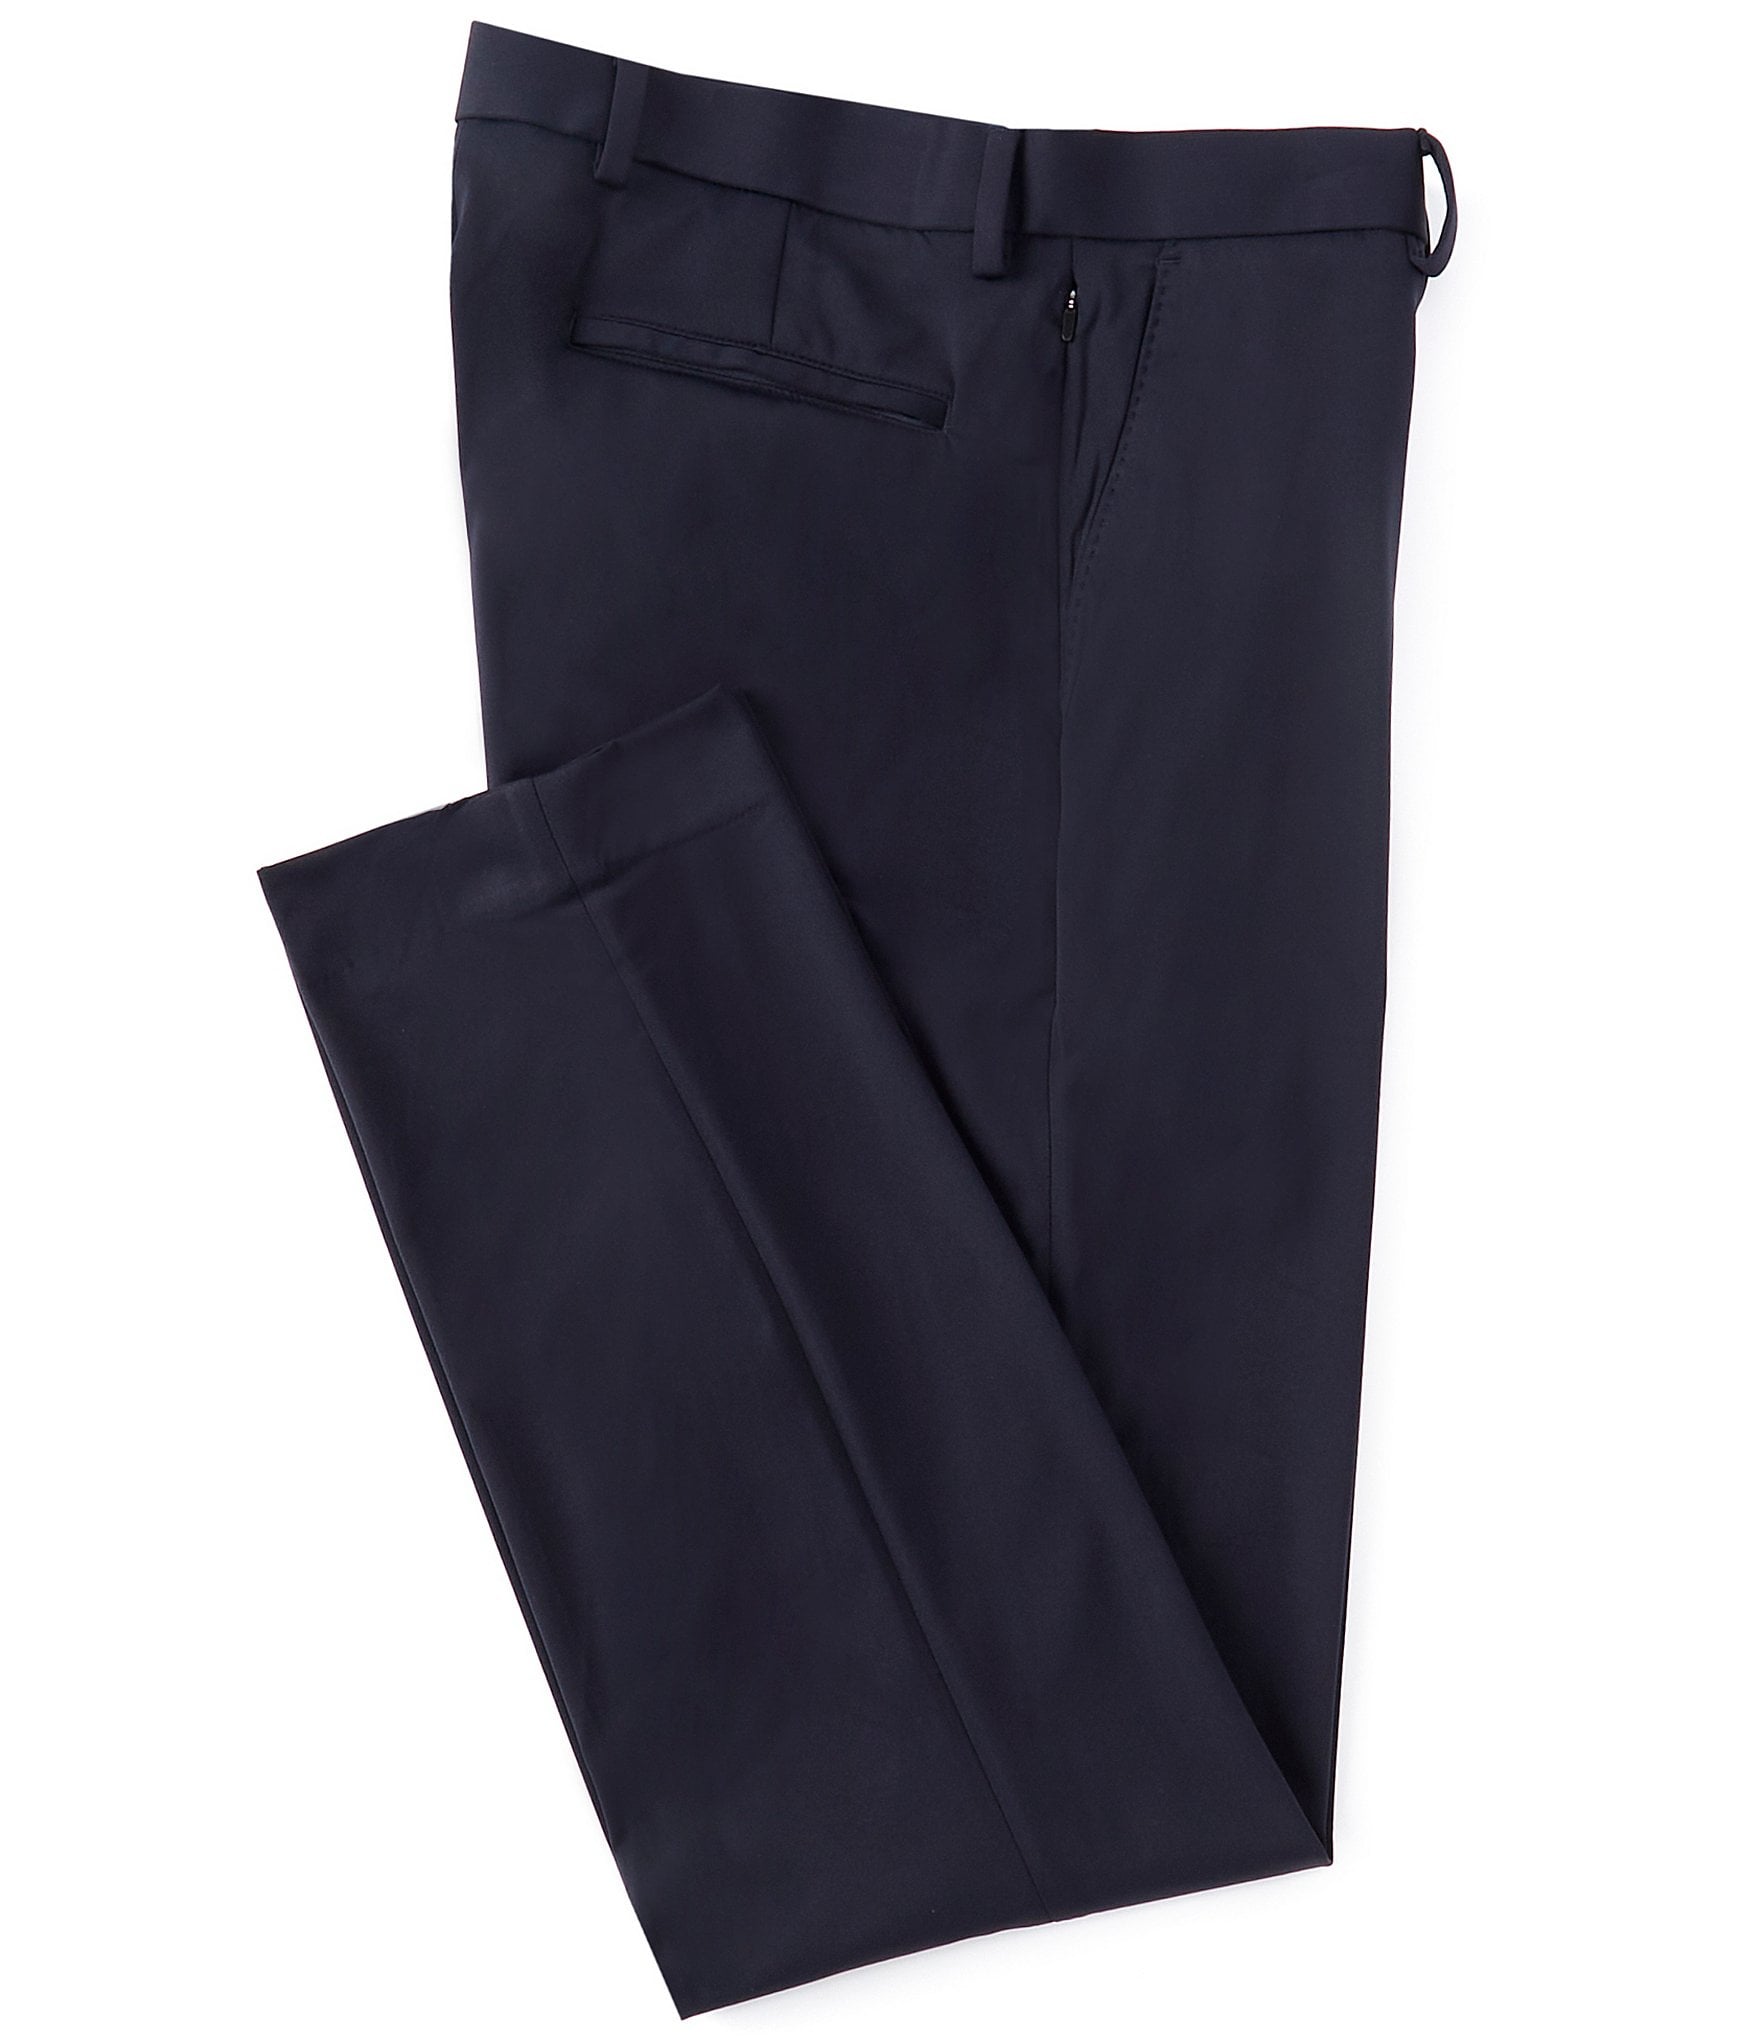 Perfect Stretch Josie Pants - Chico's Off The Rack - Chico's Outlet